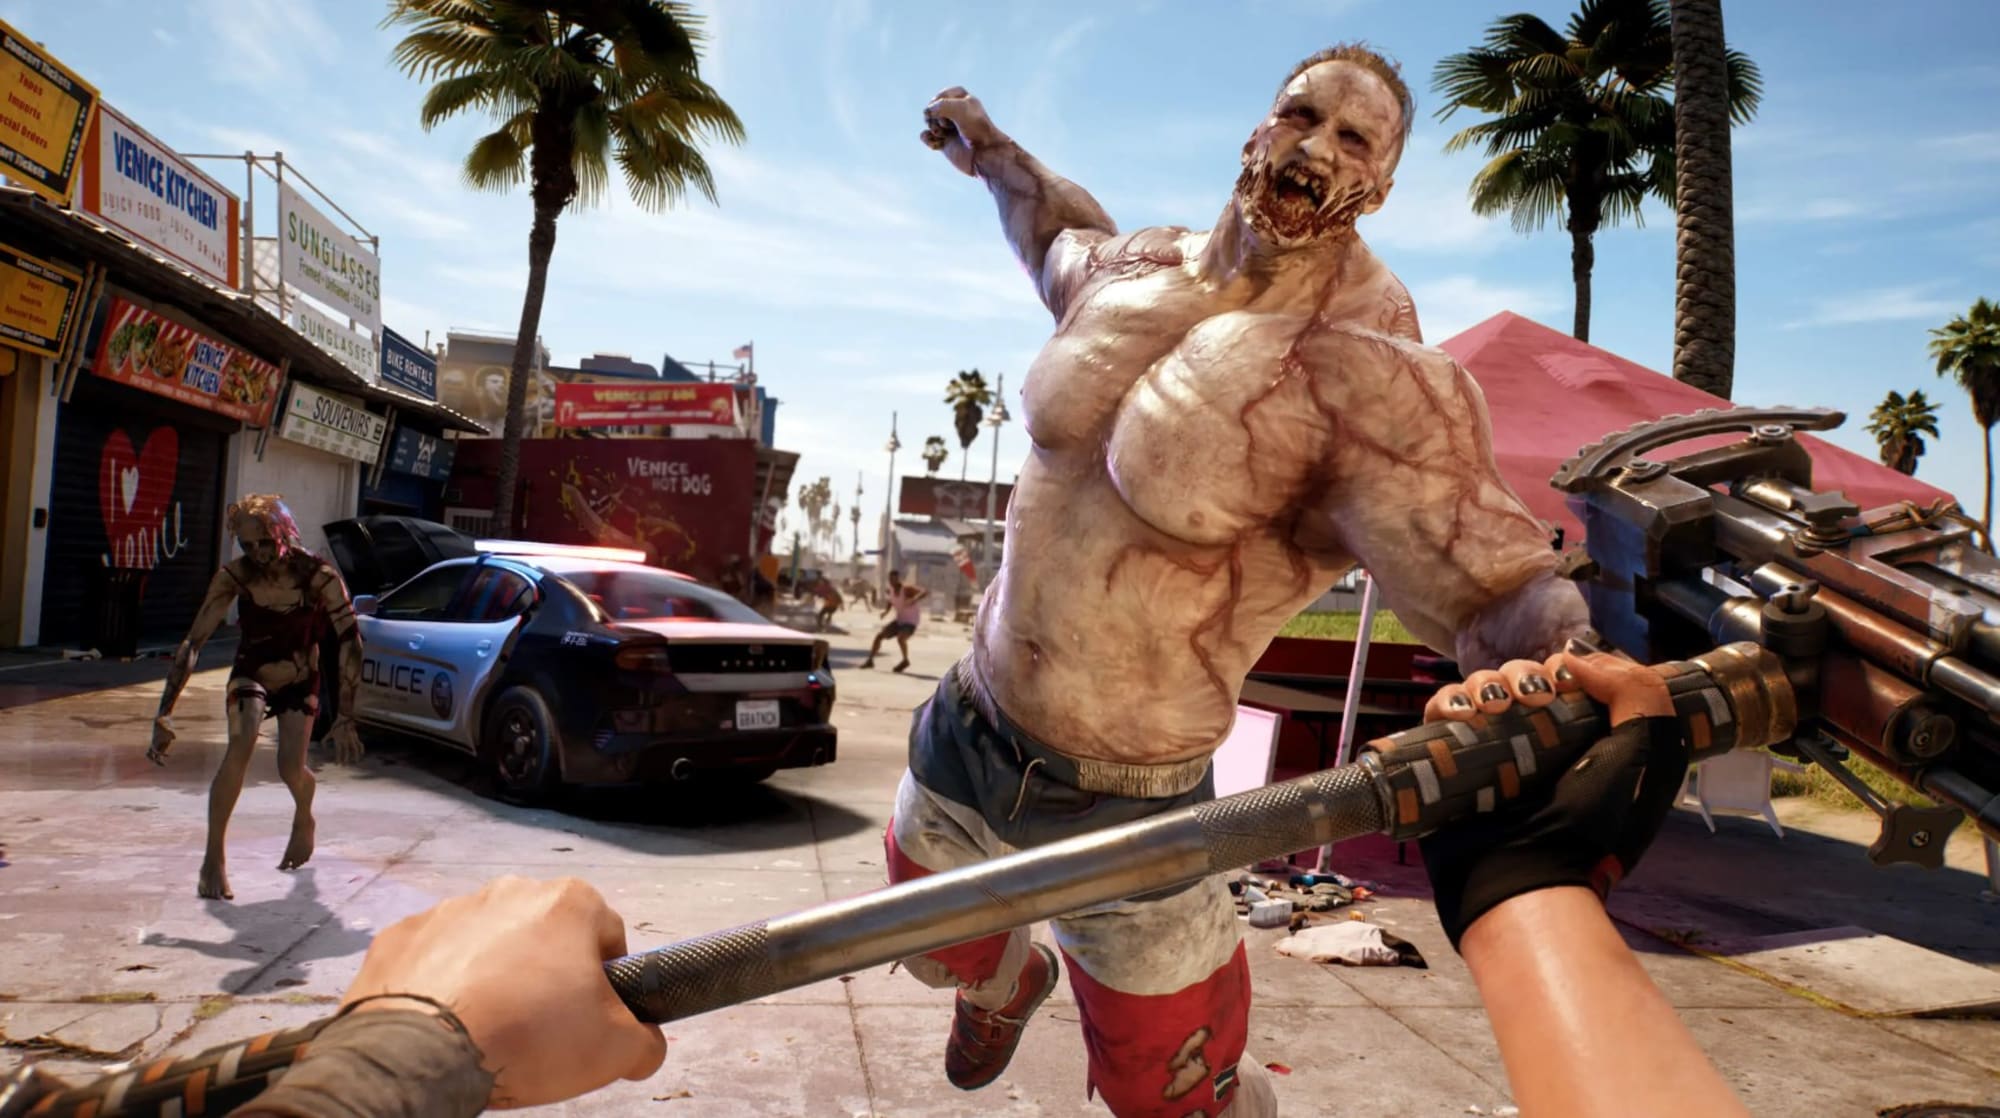 Petition · ADD CROSSPLAY TO DEAD ISLAND 2 ·